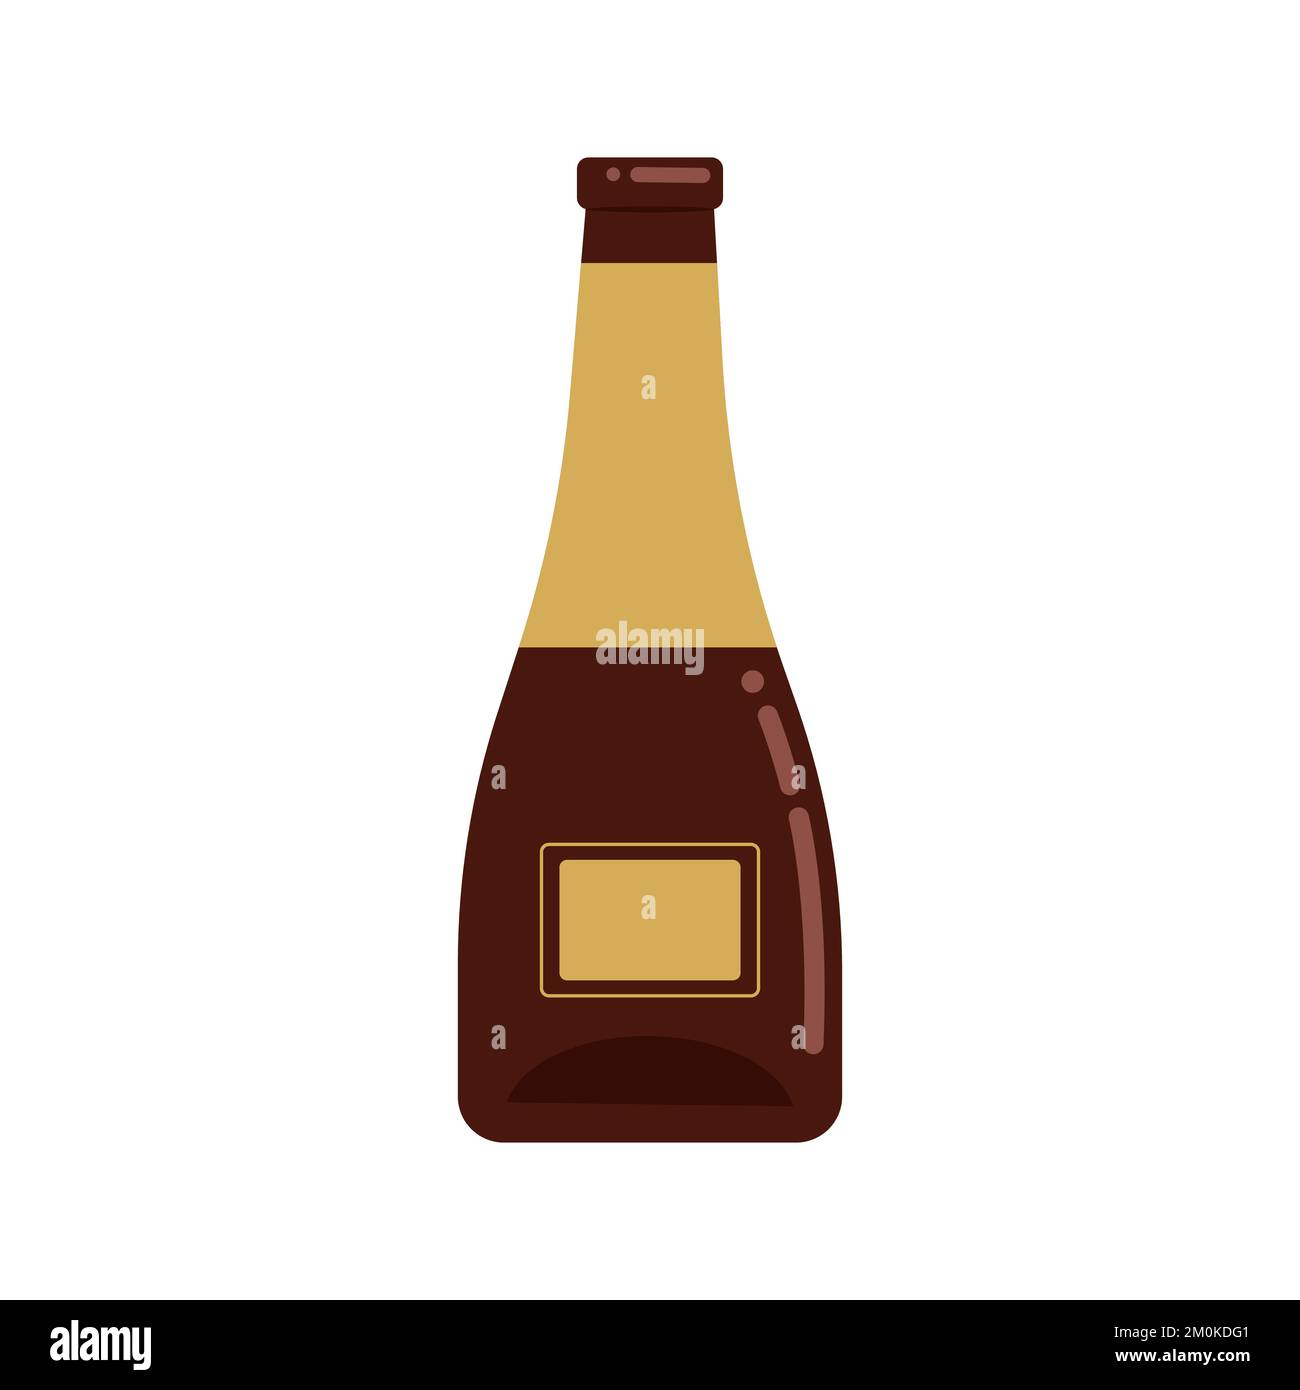 Glass bottle for wine. Vector illustration in flat style. Isolated object on a white background Stock Vector